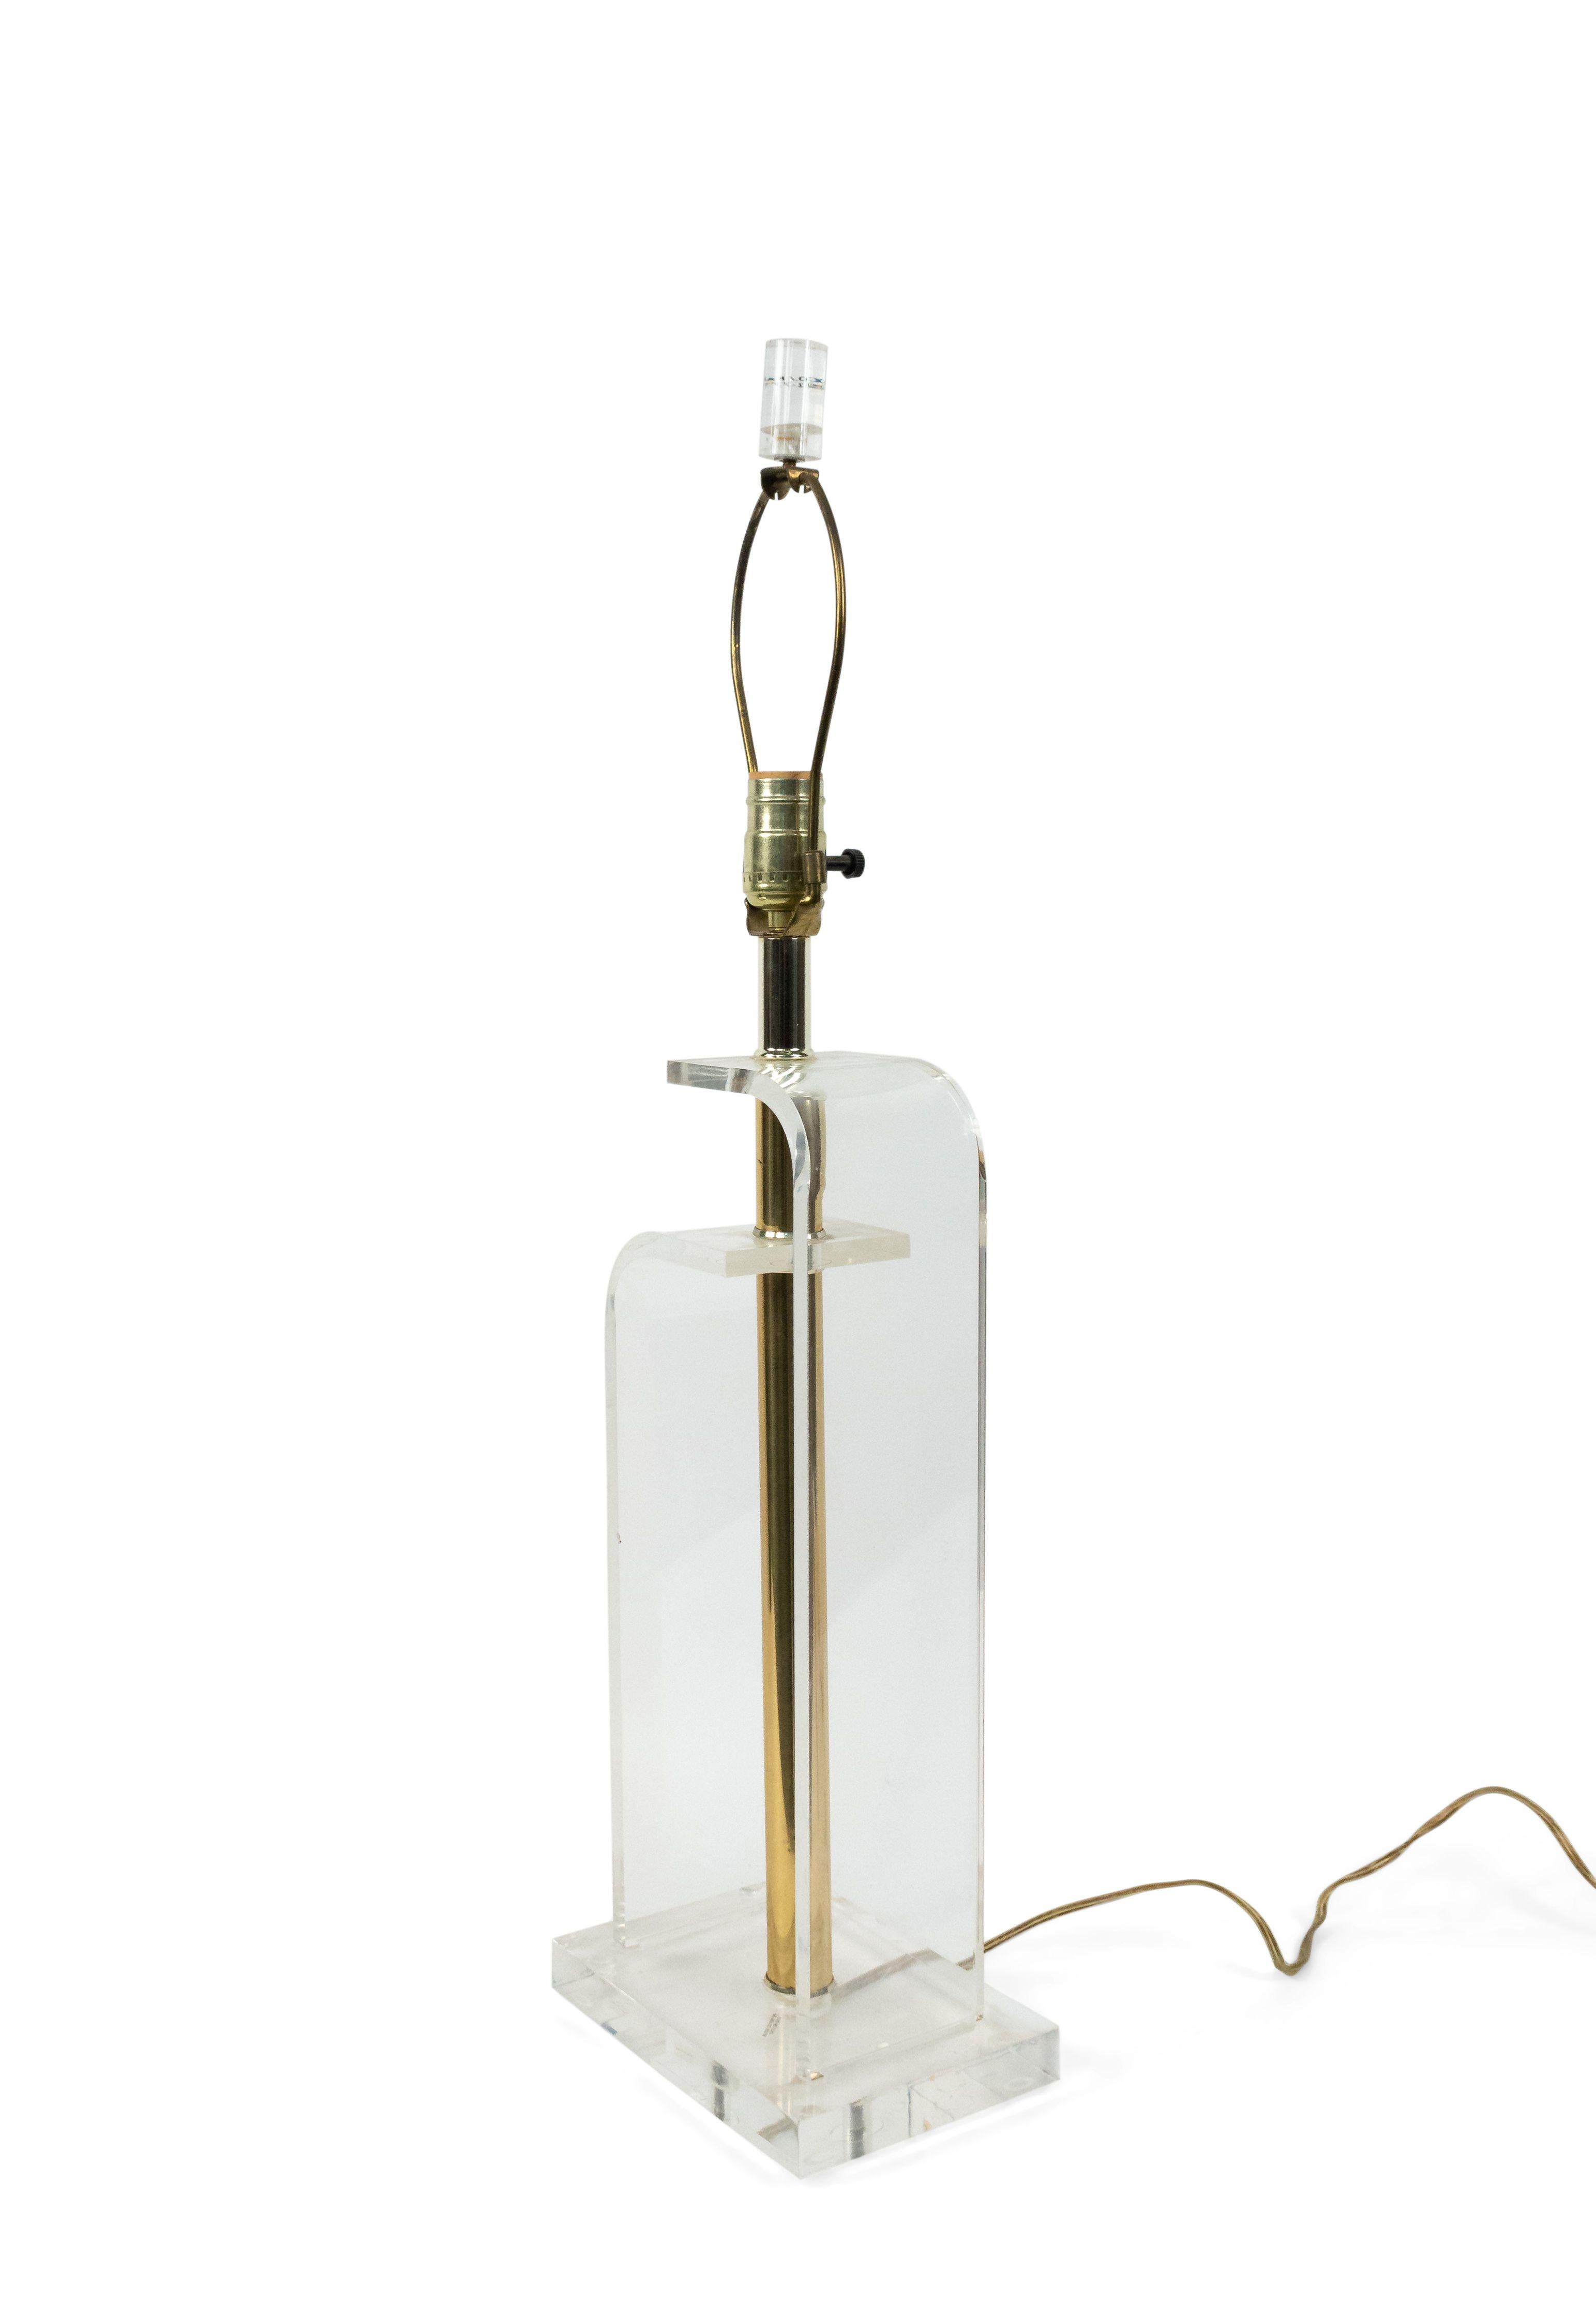 20th Century American Midcentury Chrome and Lucite Table Lamp For Sale